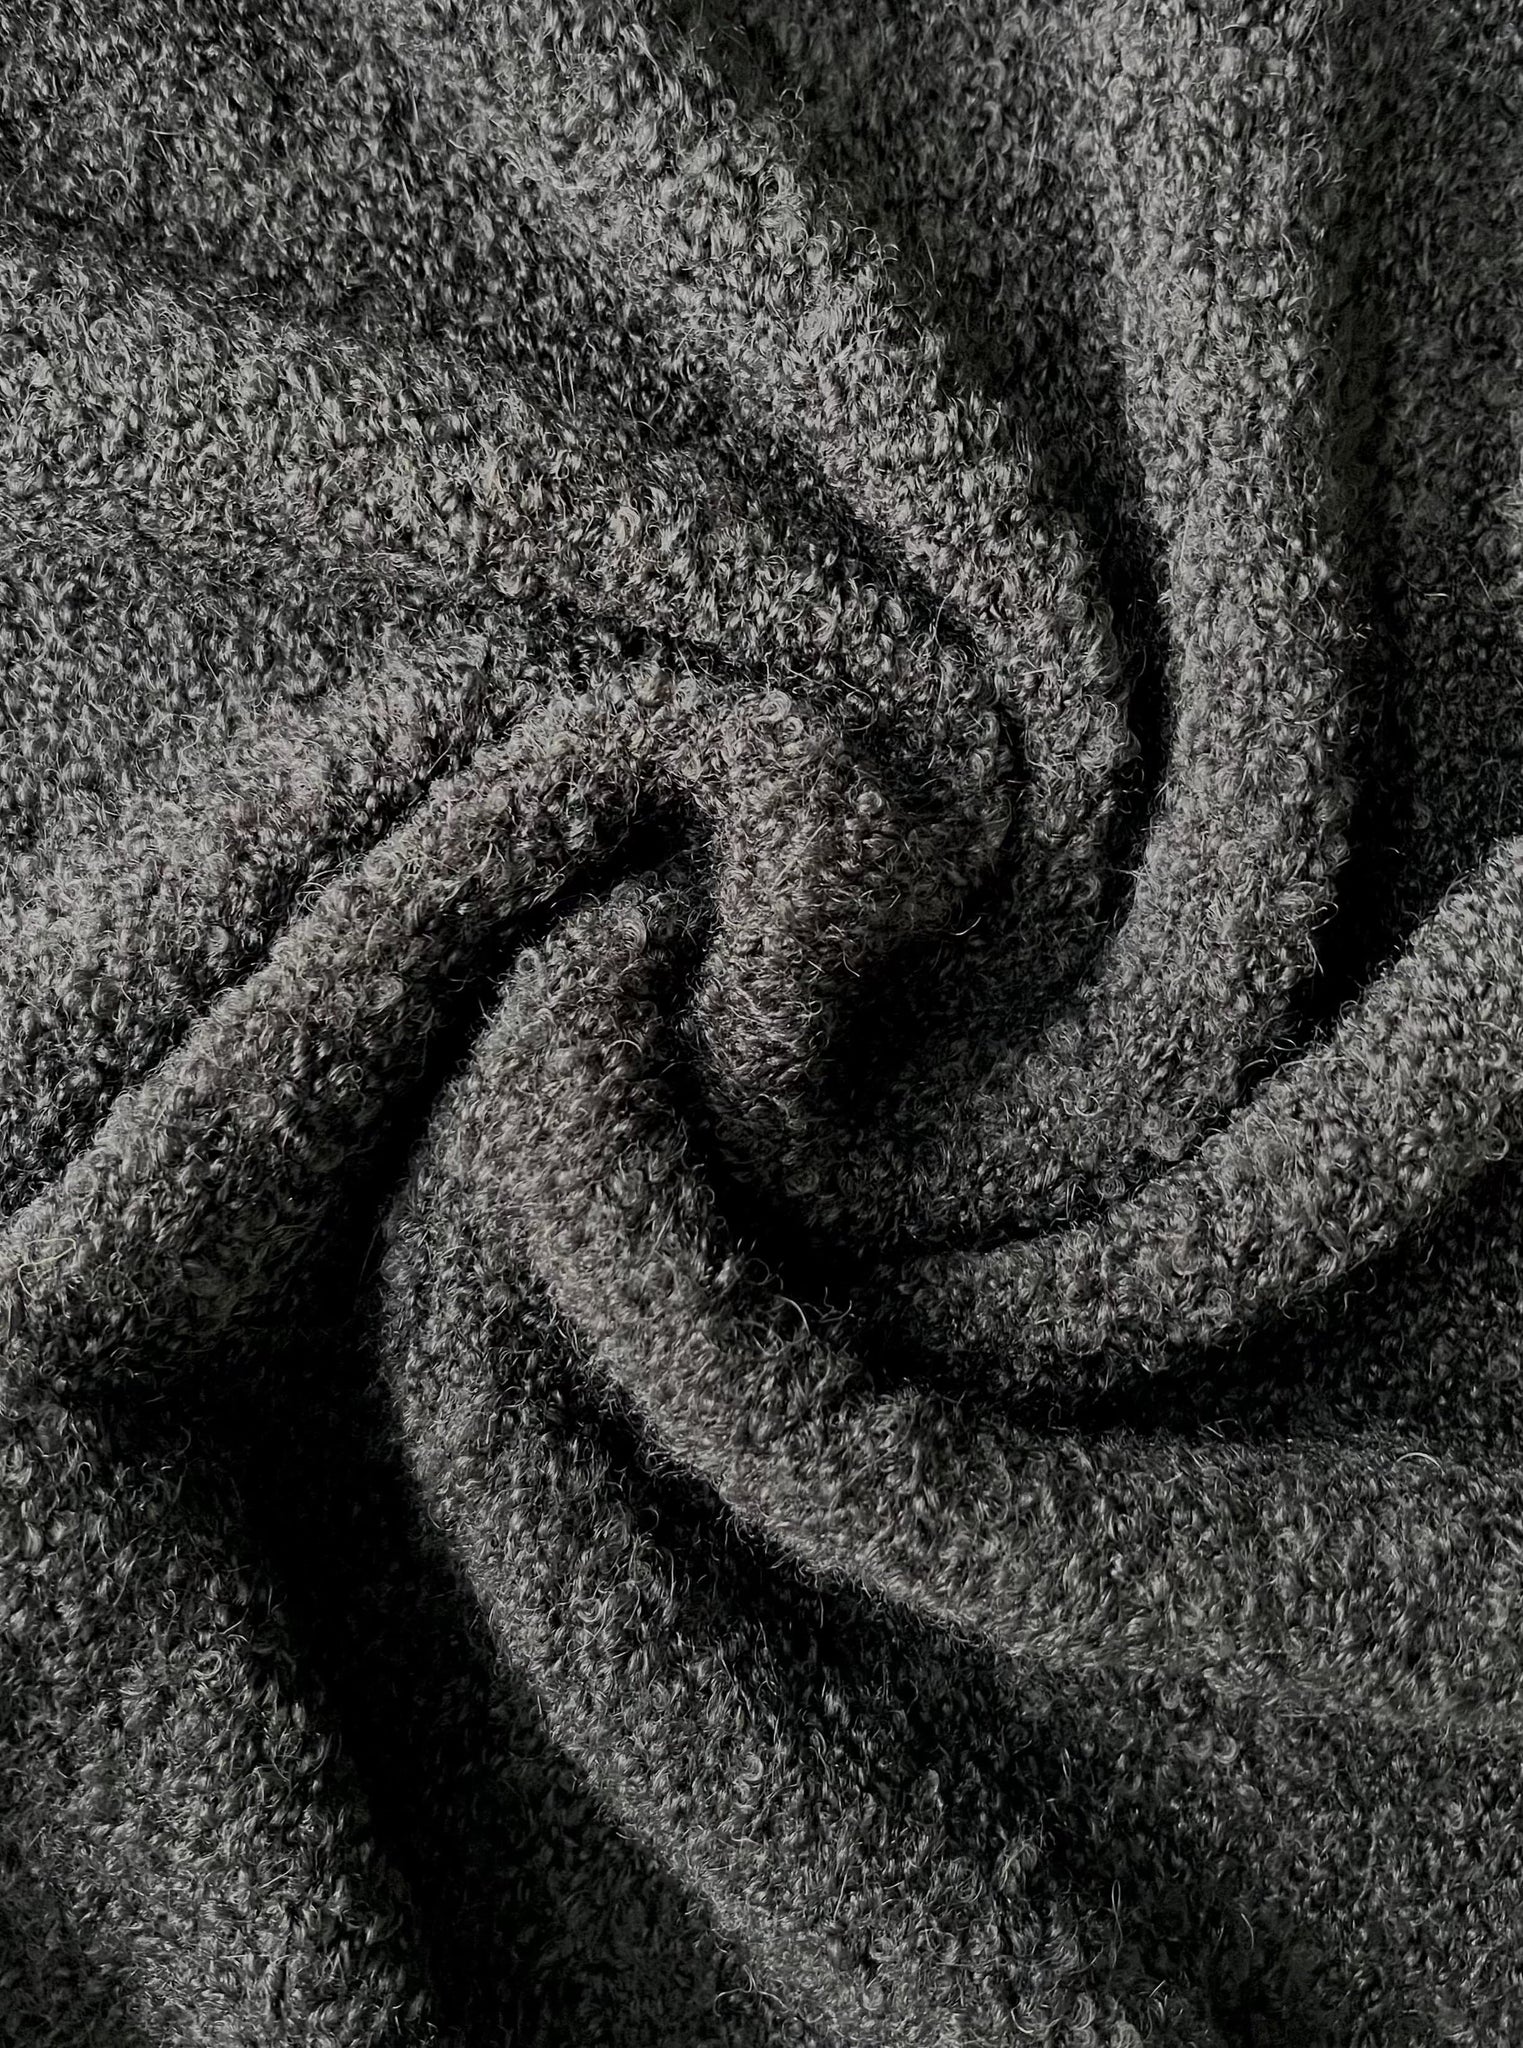 A close up image of a Heirloom Knit Scarf - Charcoal Grey.